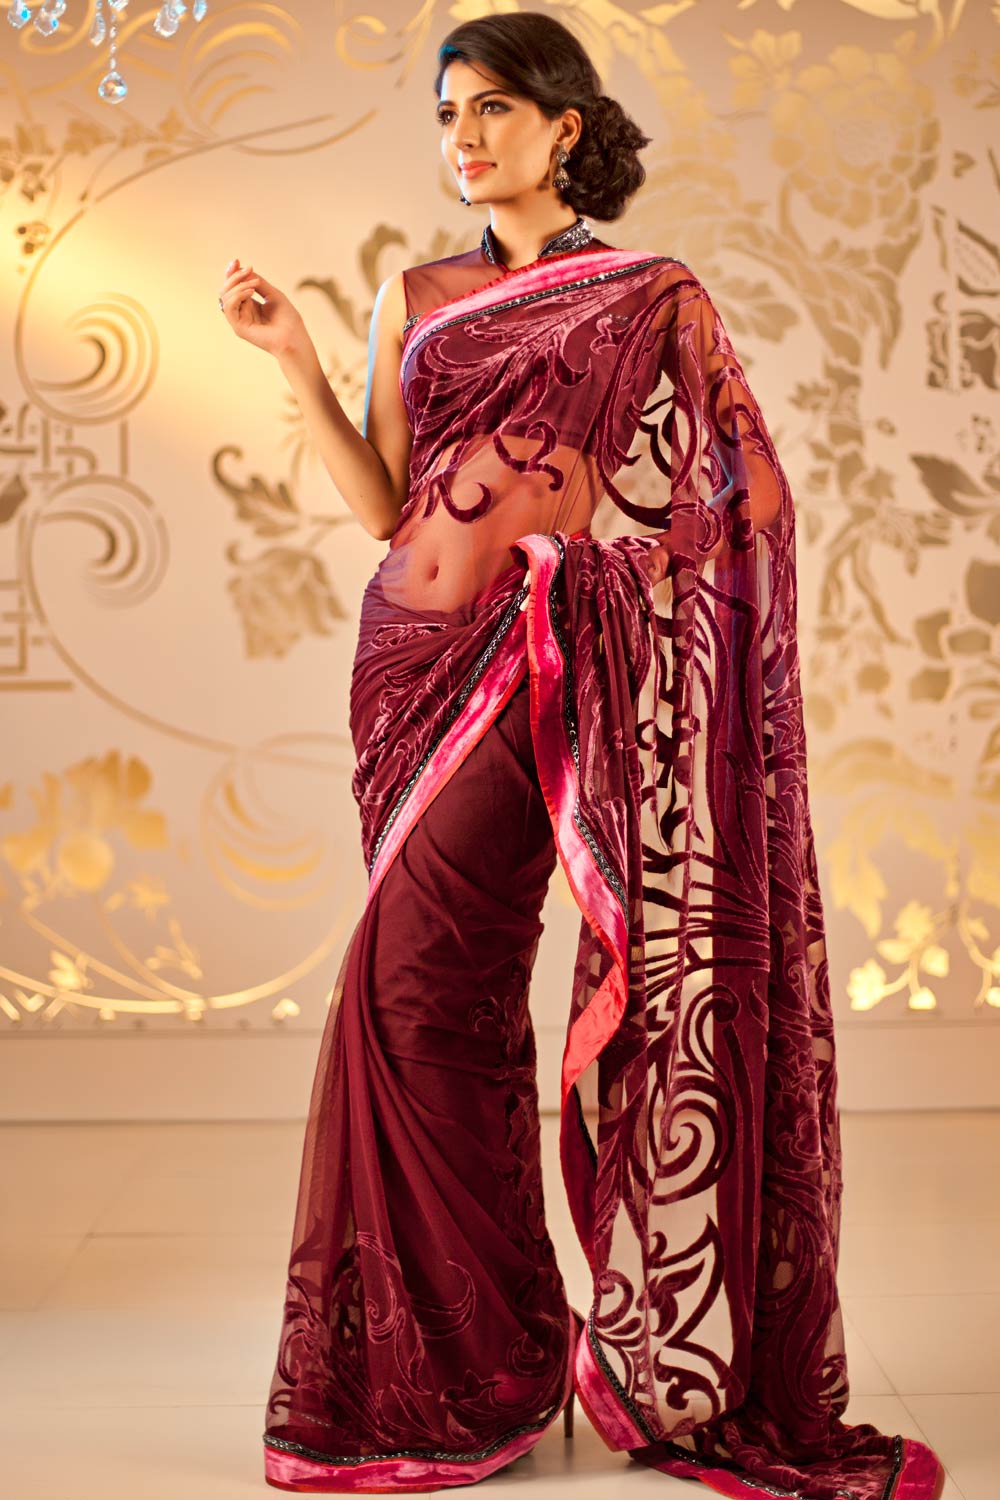 Bridal Sarees Indian Bridal Sarees Bridal Sarees For Parties Bridal Party Wear Sarees 